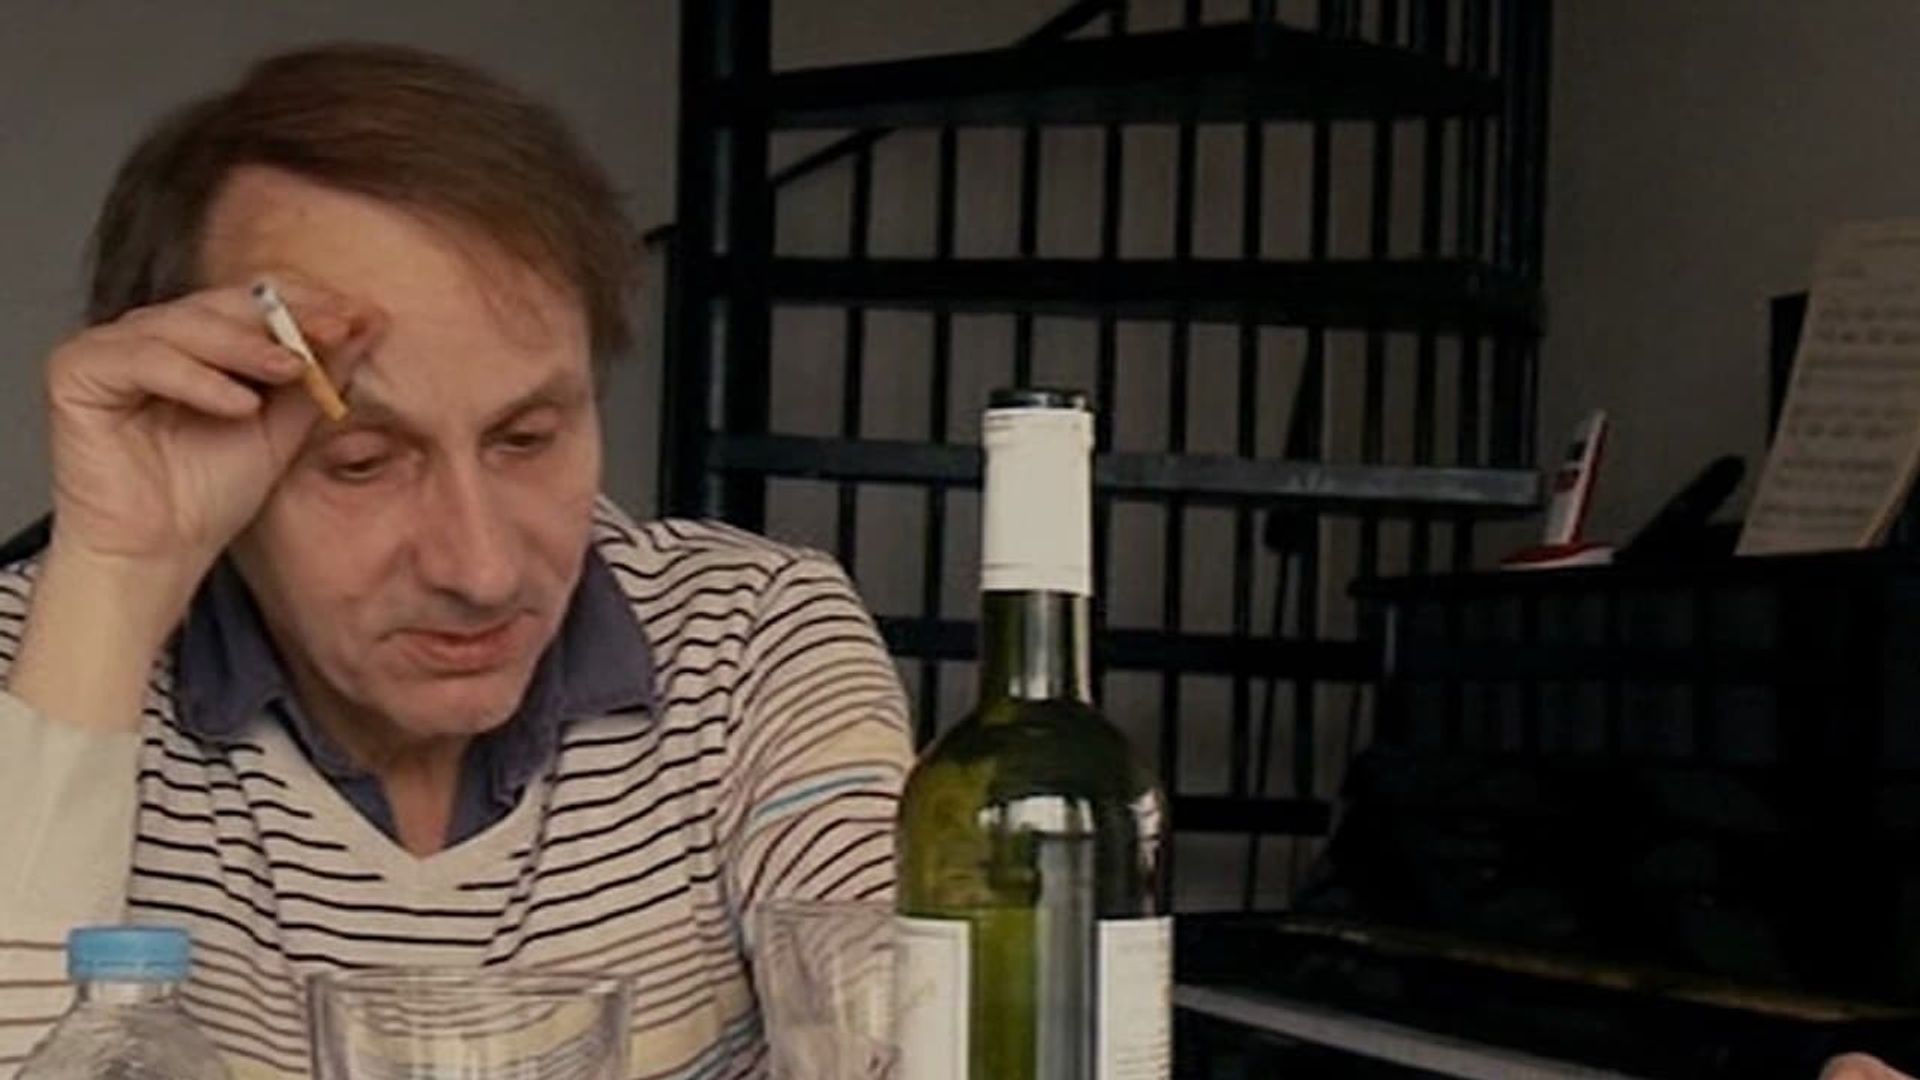 Kidnapping of Michel Houellebecq background